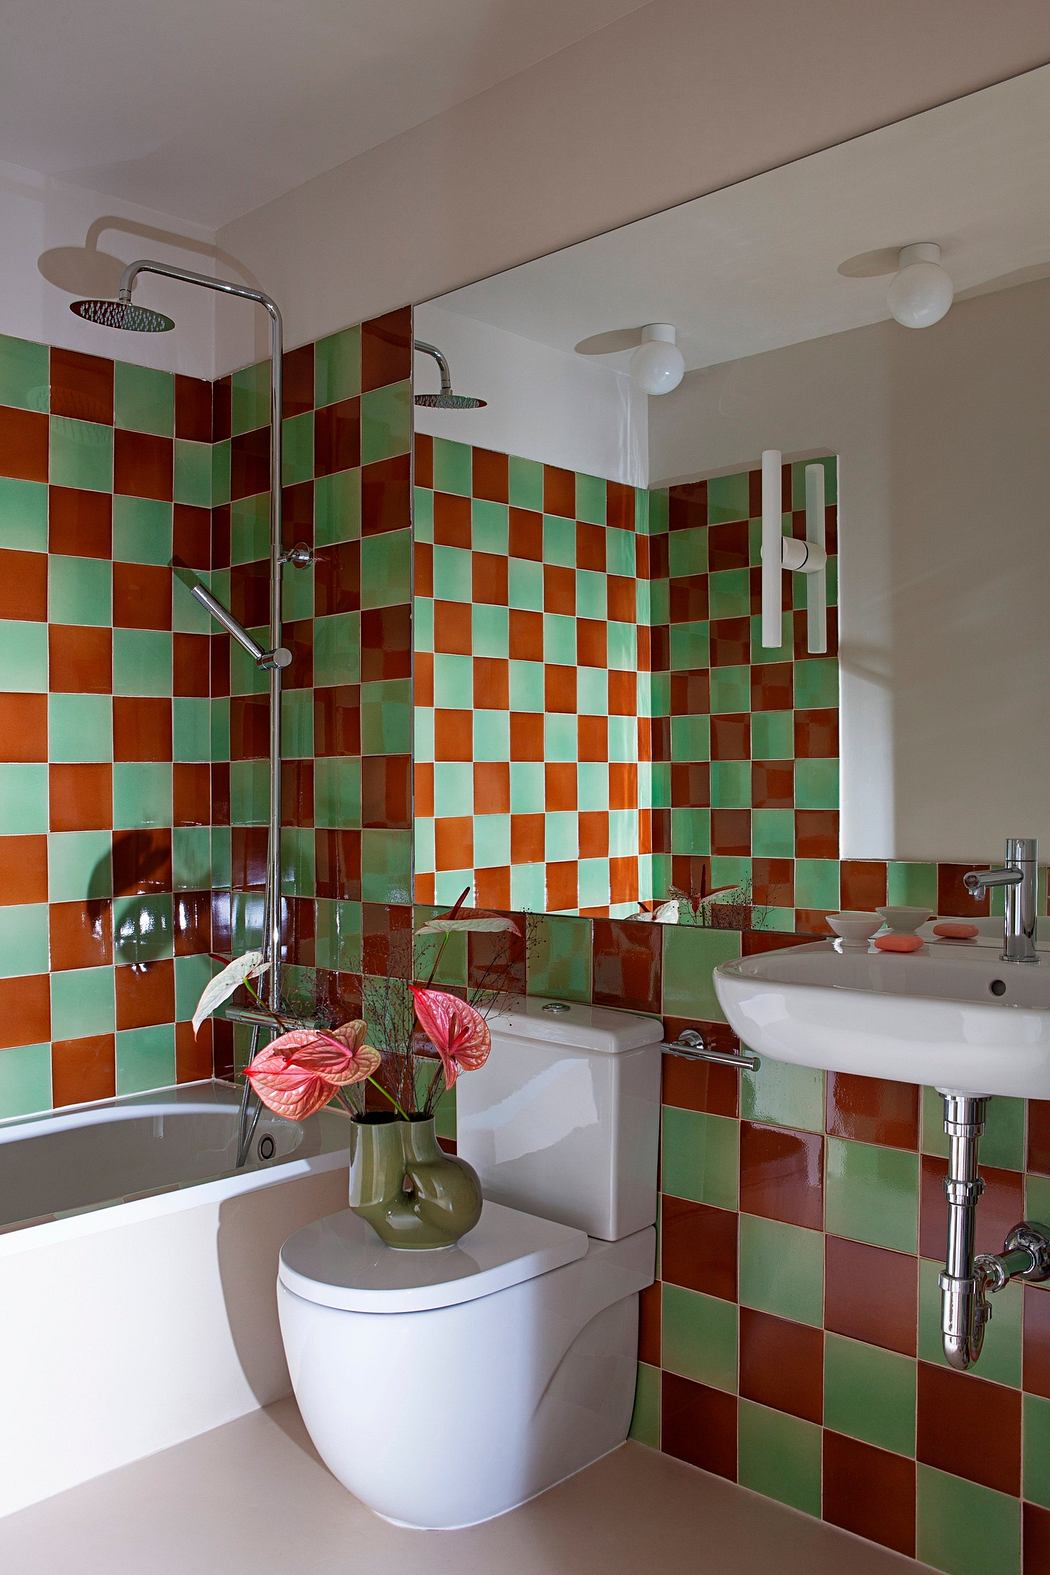 Modern bathroom with green and orange checkered tiles, white fixtures, and pink flowers